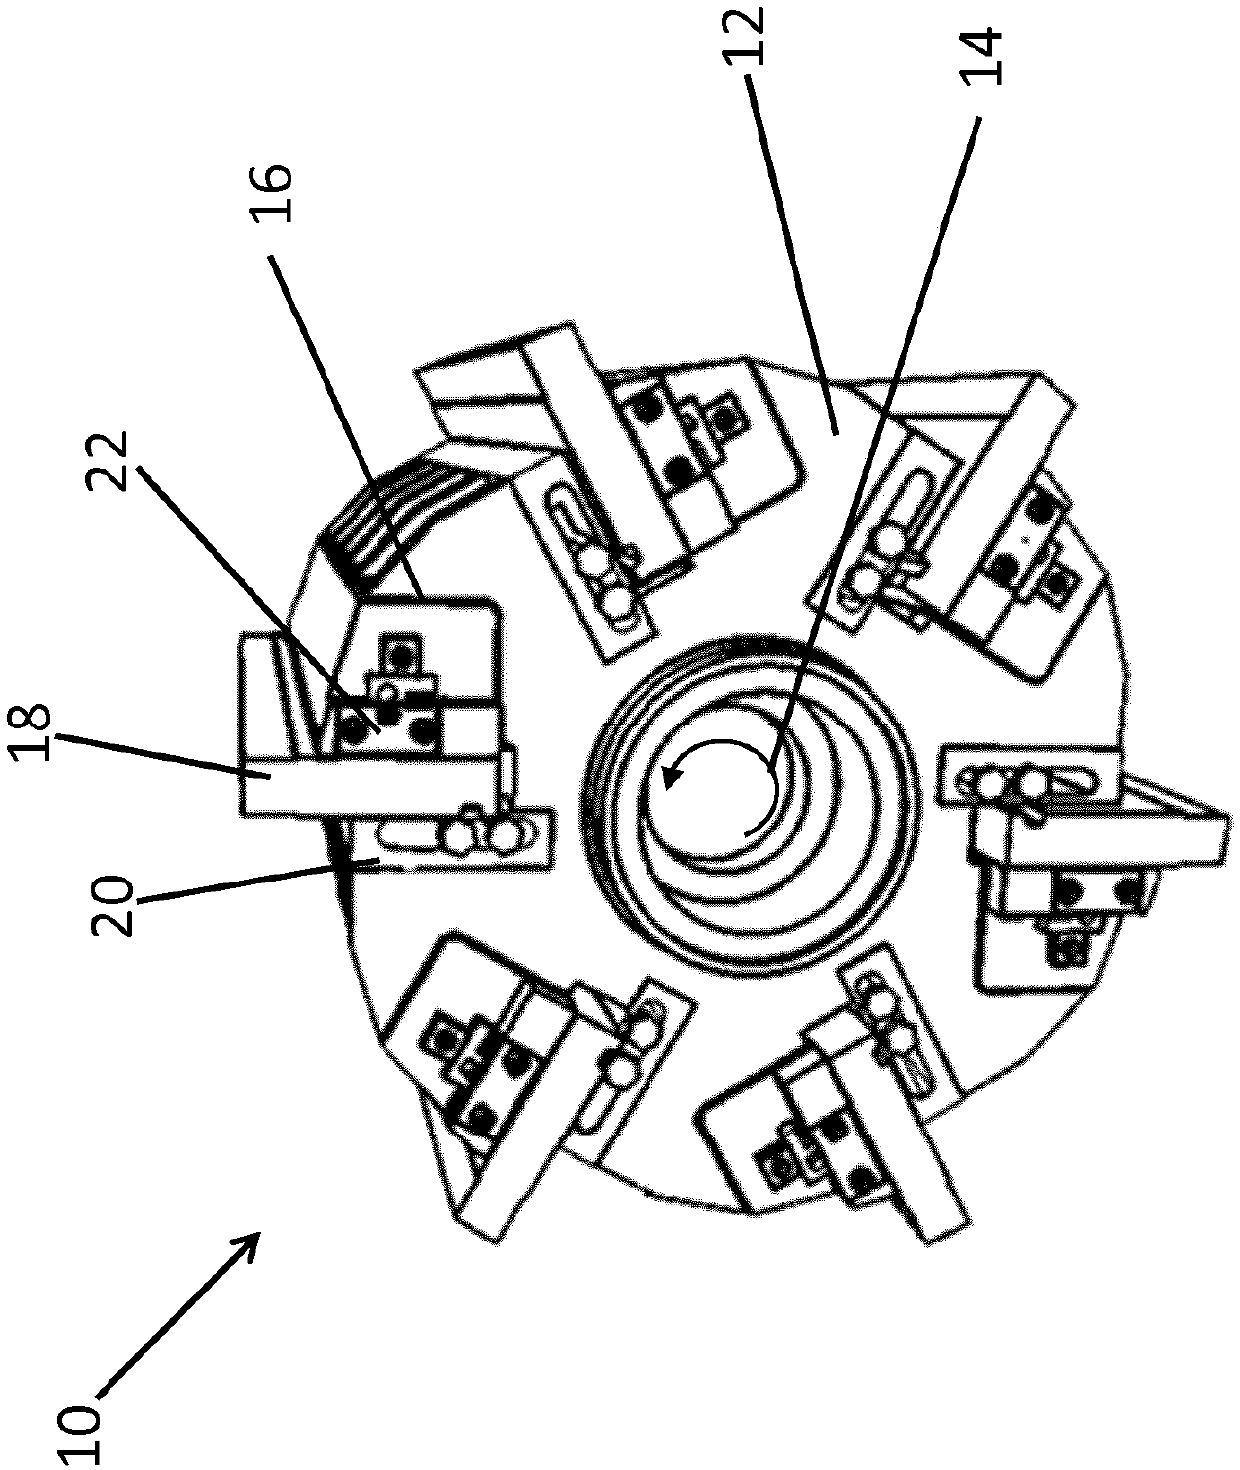 Rotor for an impact crusher